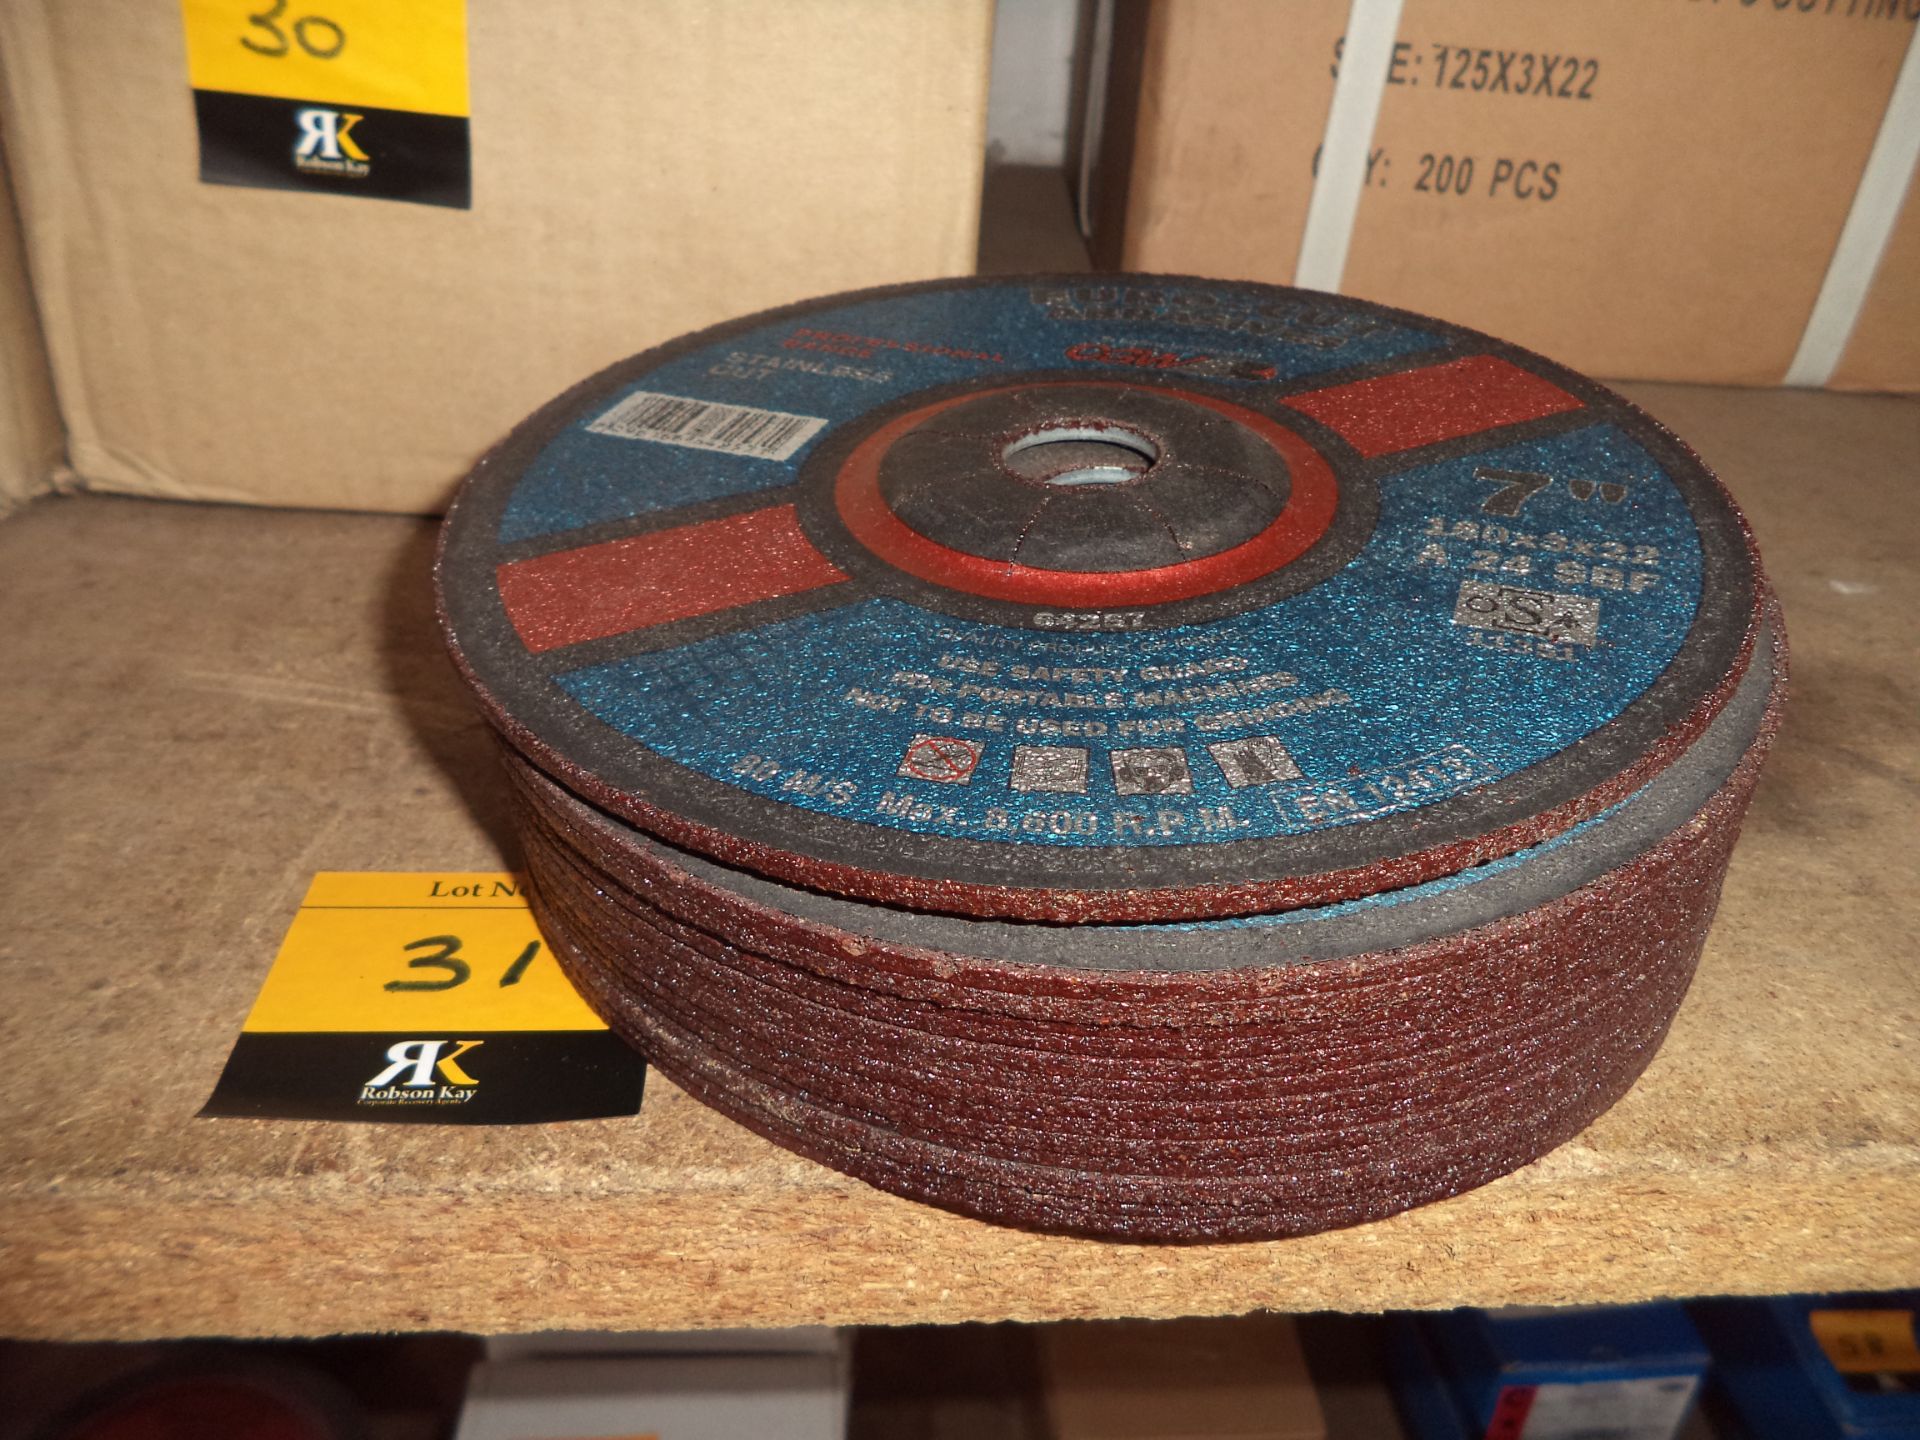 14 off Euro-cut Abrasives 7"/180mm stainless grinding discs IMPORTANT: Please remember goods